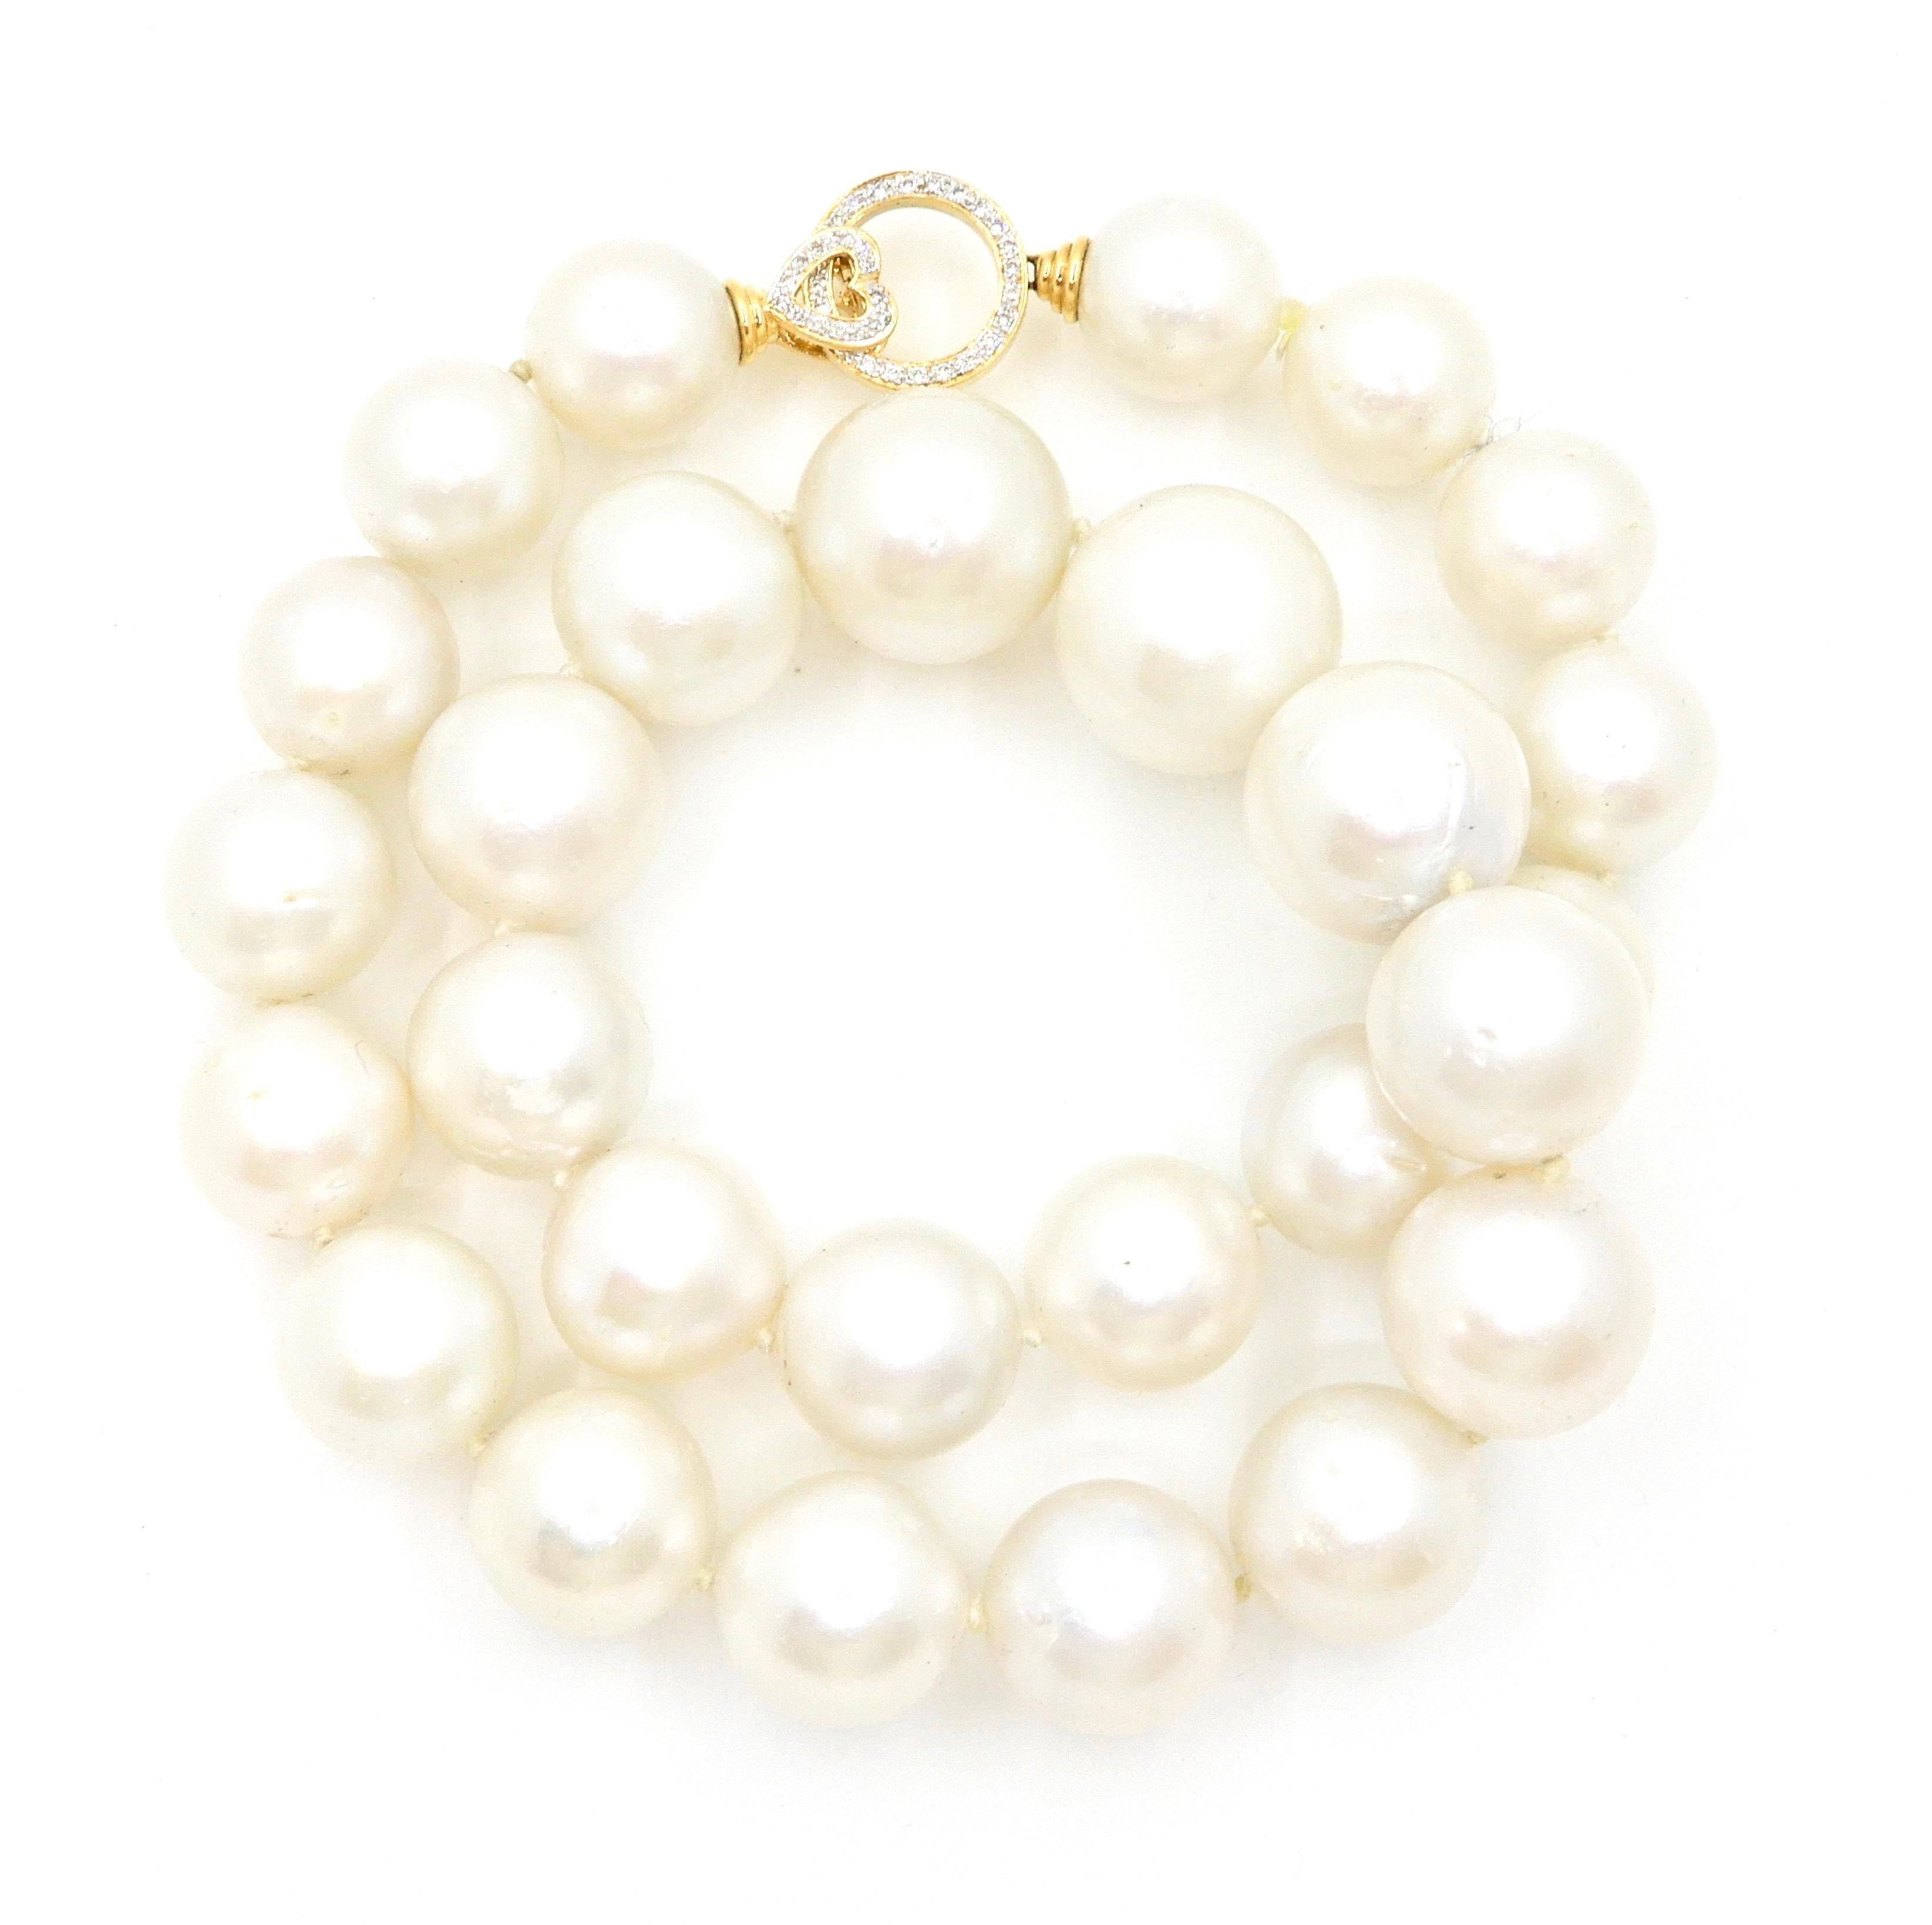 Make this gorgeous 47 cm South Sea Pearl Necklace with 18 Carat Yellow Gold and Diamond Clasp a family heirloom. This beautiful necklace is make of a strand of twenty-seven individually knotted, graduated South Sea pearls and finished with an 18